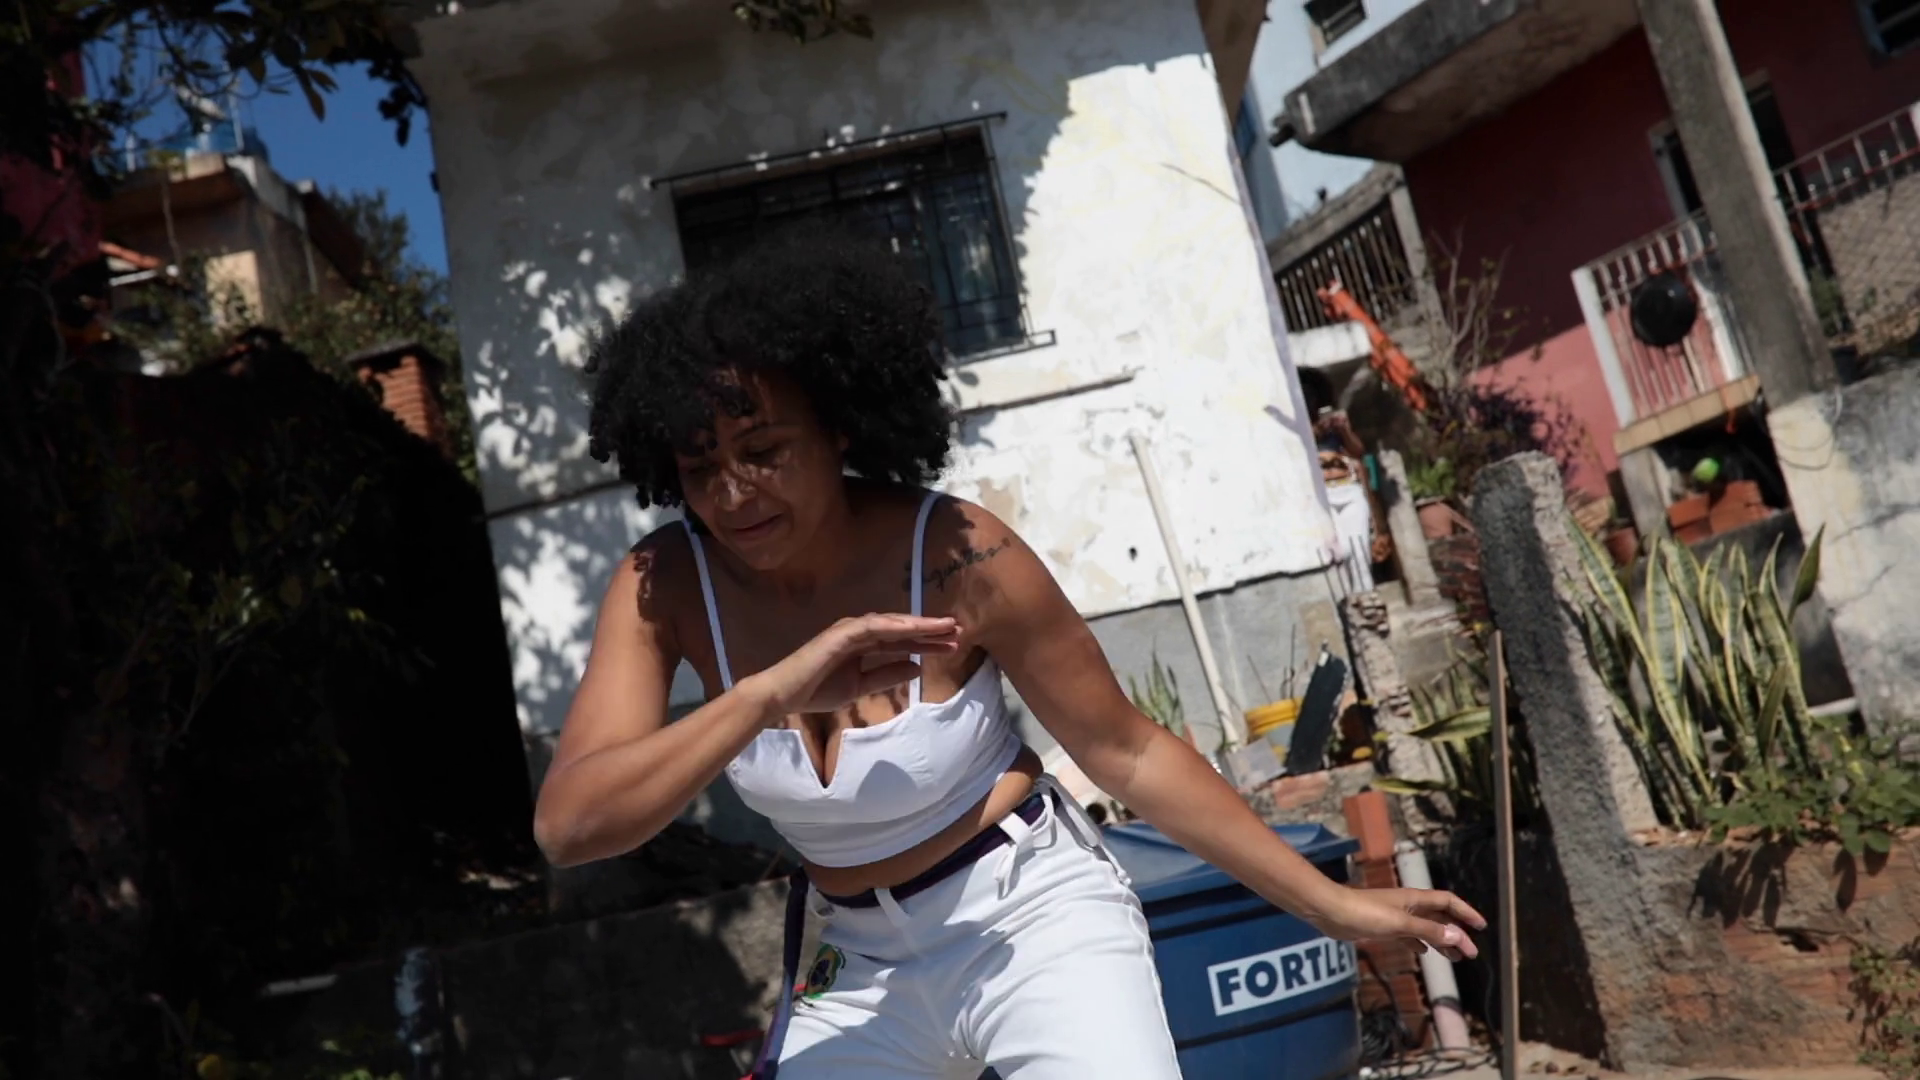 Black Woman Performing Capoeira Kicks And Dancing To The Camera Stock Video Footage 00:34 SBV 346648839